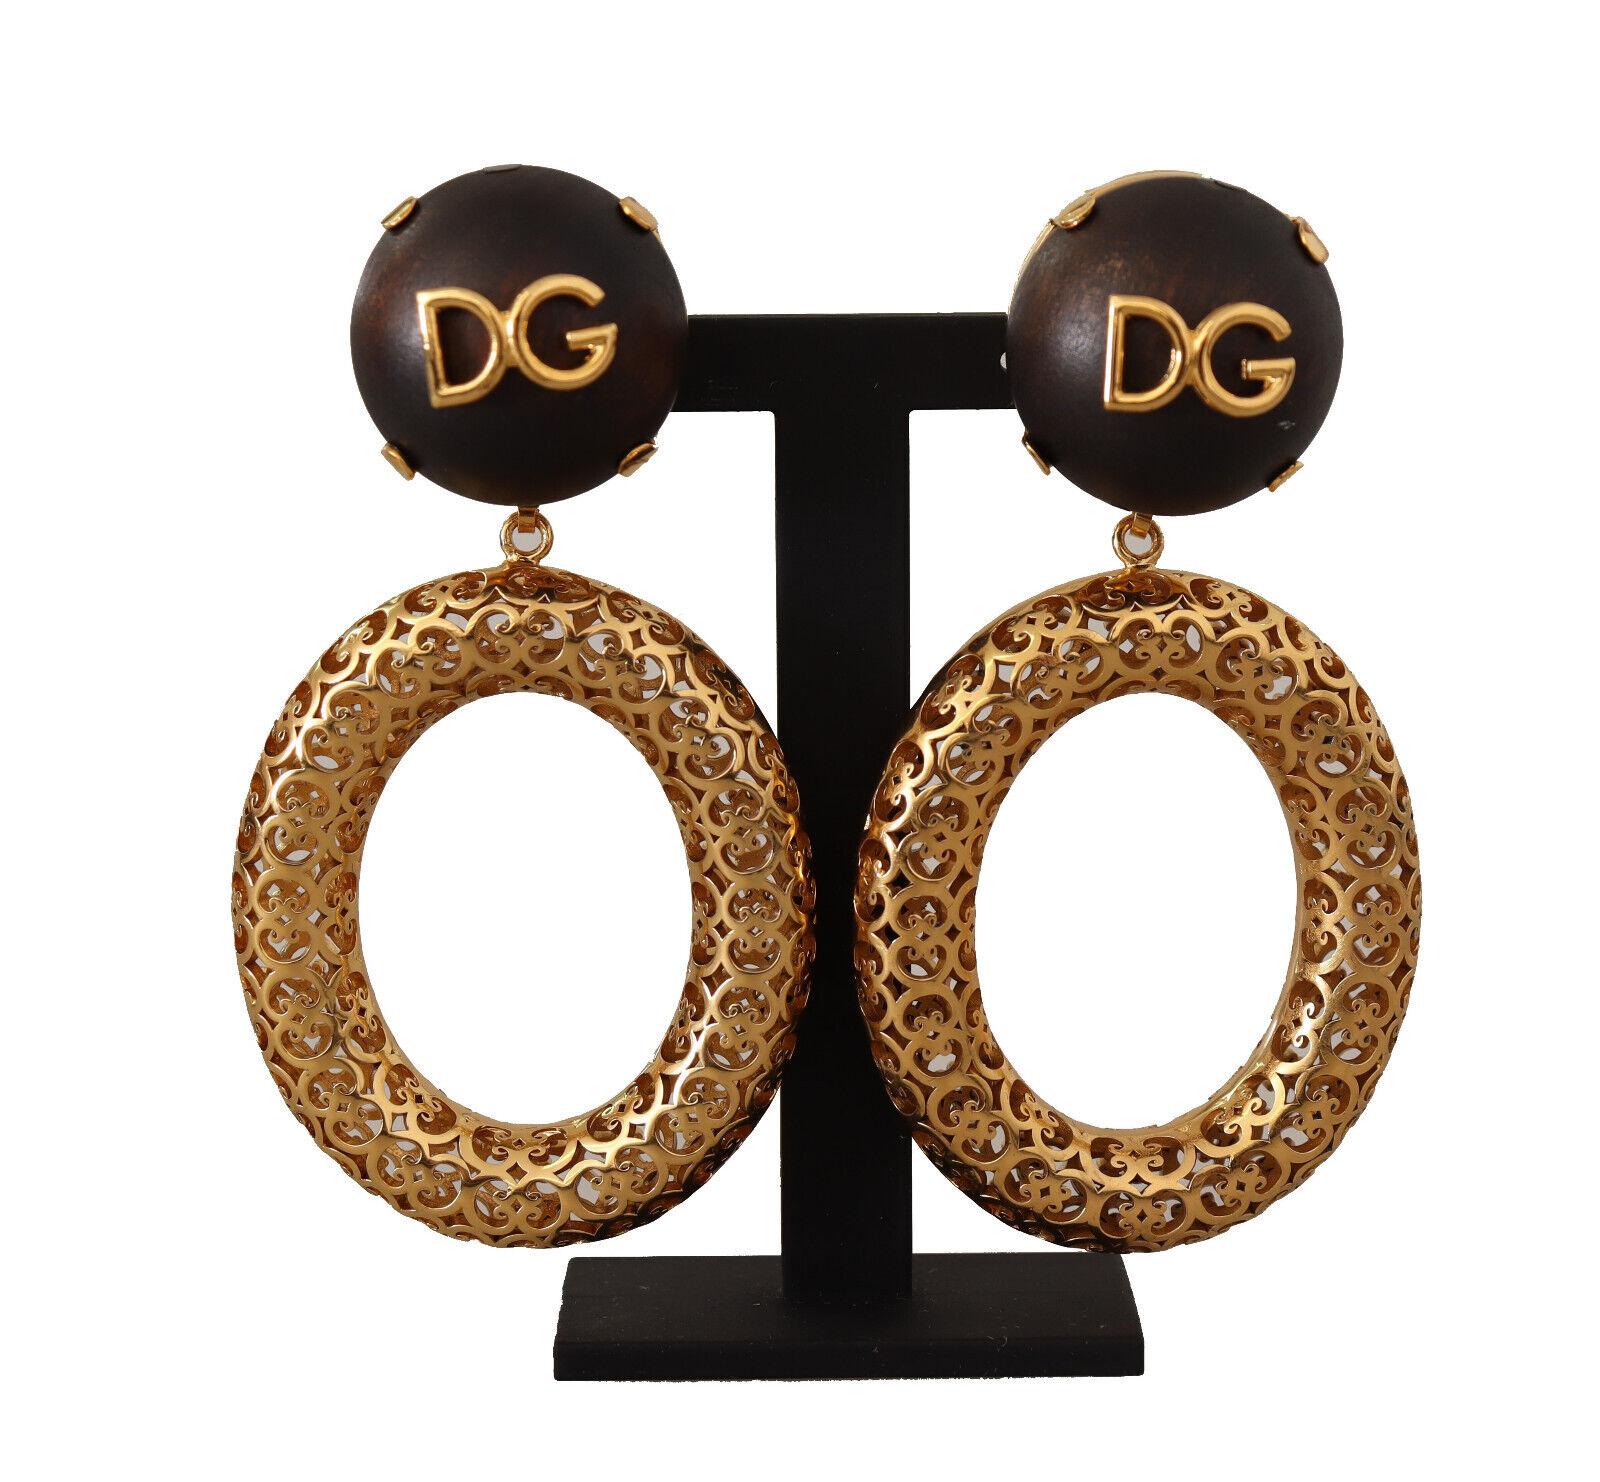 DOLCE & GABBANA

Gorgeous brand new with tags, 100% Authentic Dolce & Gabbana Earrings.

Model: Clip-on dangling hoop
Motive: Sicily
Material: 80% Brass, 20% Wood

Color: Gold and brown

Logo details
Made in Italy

Length: 8cm

Dolce & Gabbana Box,